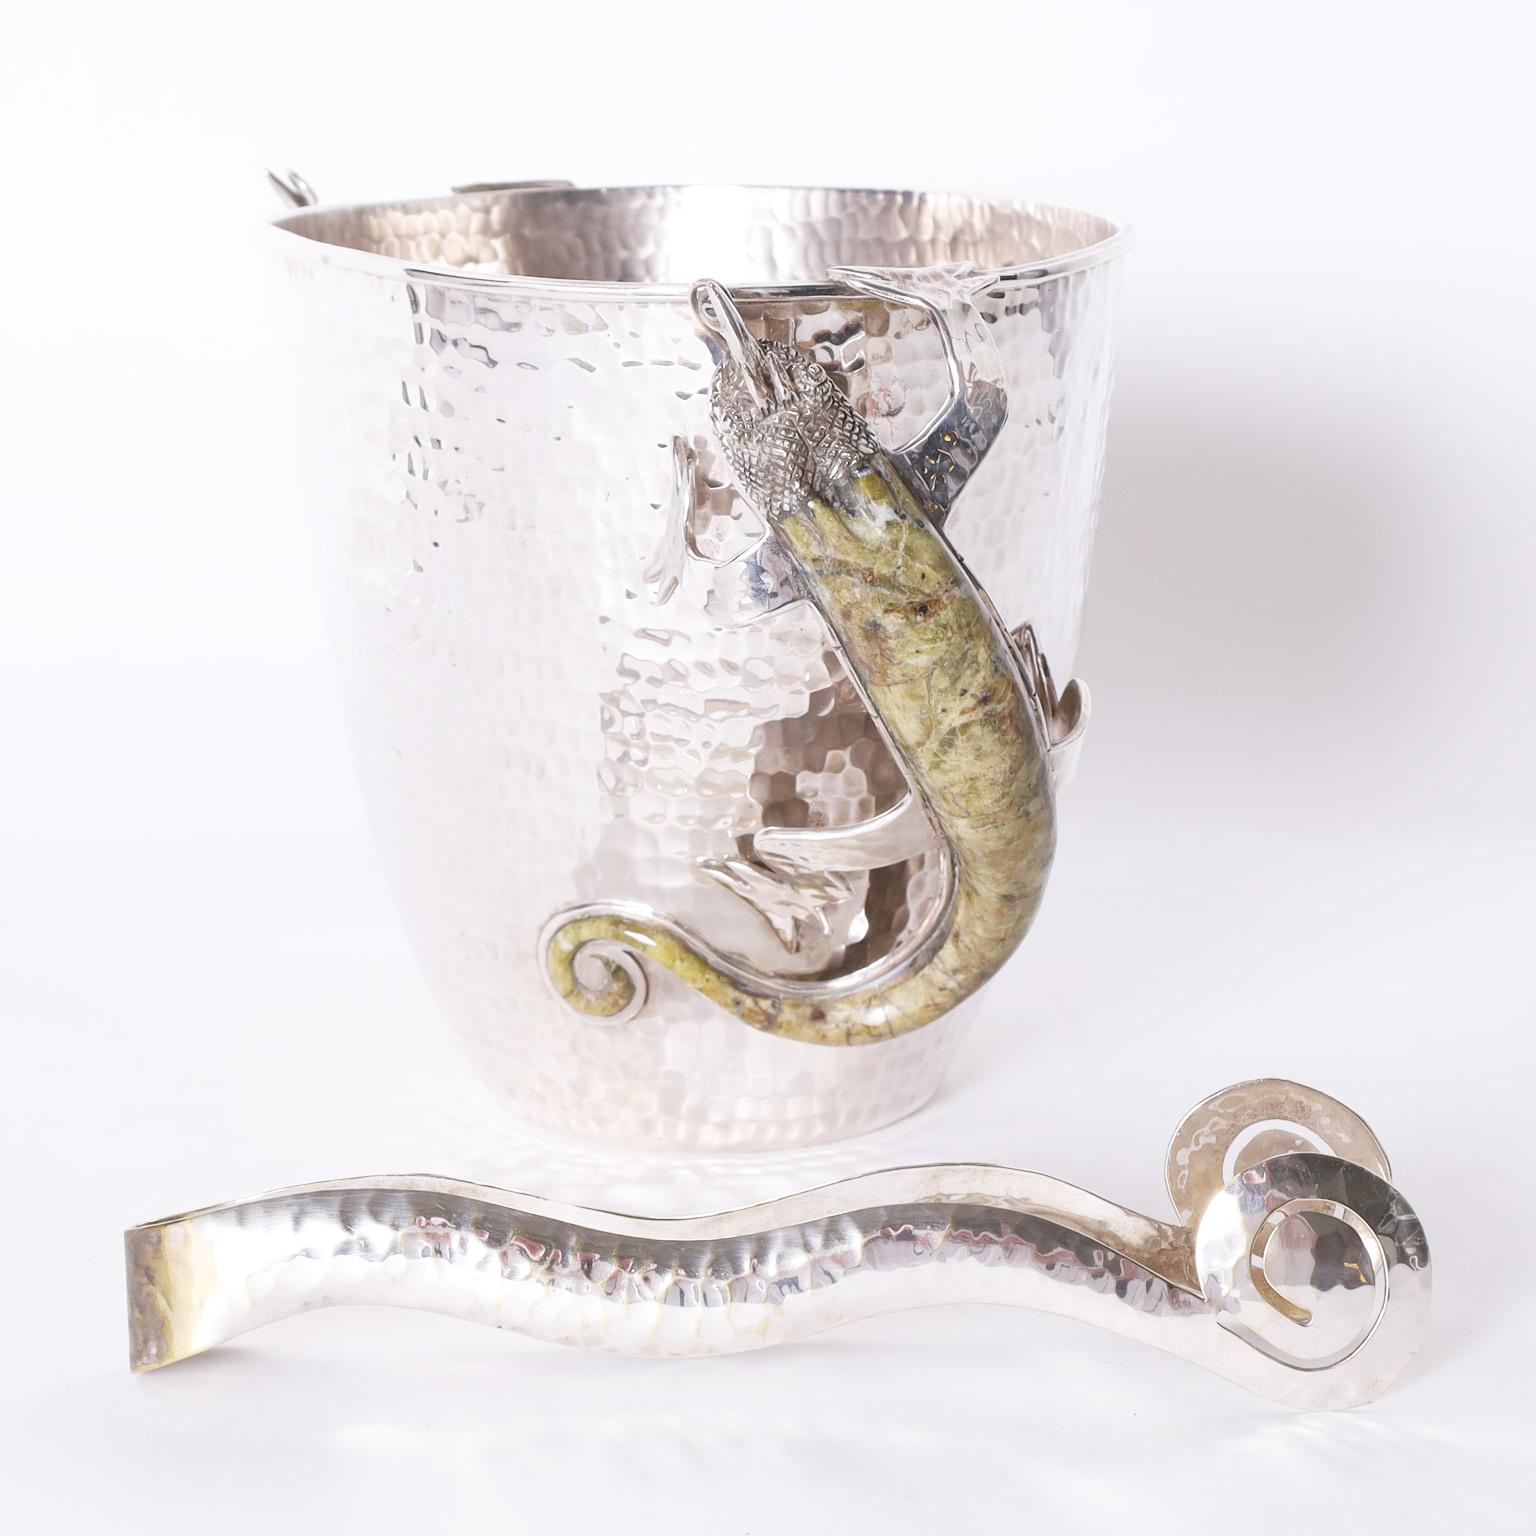 Standout modernist ice bucket and matching tongs crafted in silver plate on copper featuring stone clad lizard handles. Signed Wolmar Castillo Silversmiths on the bottom.